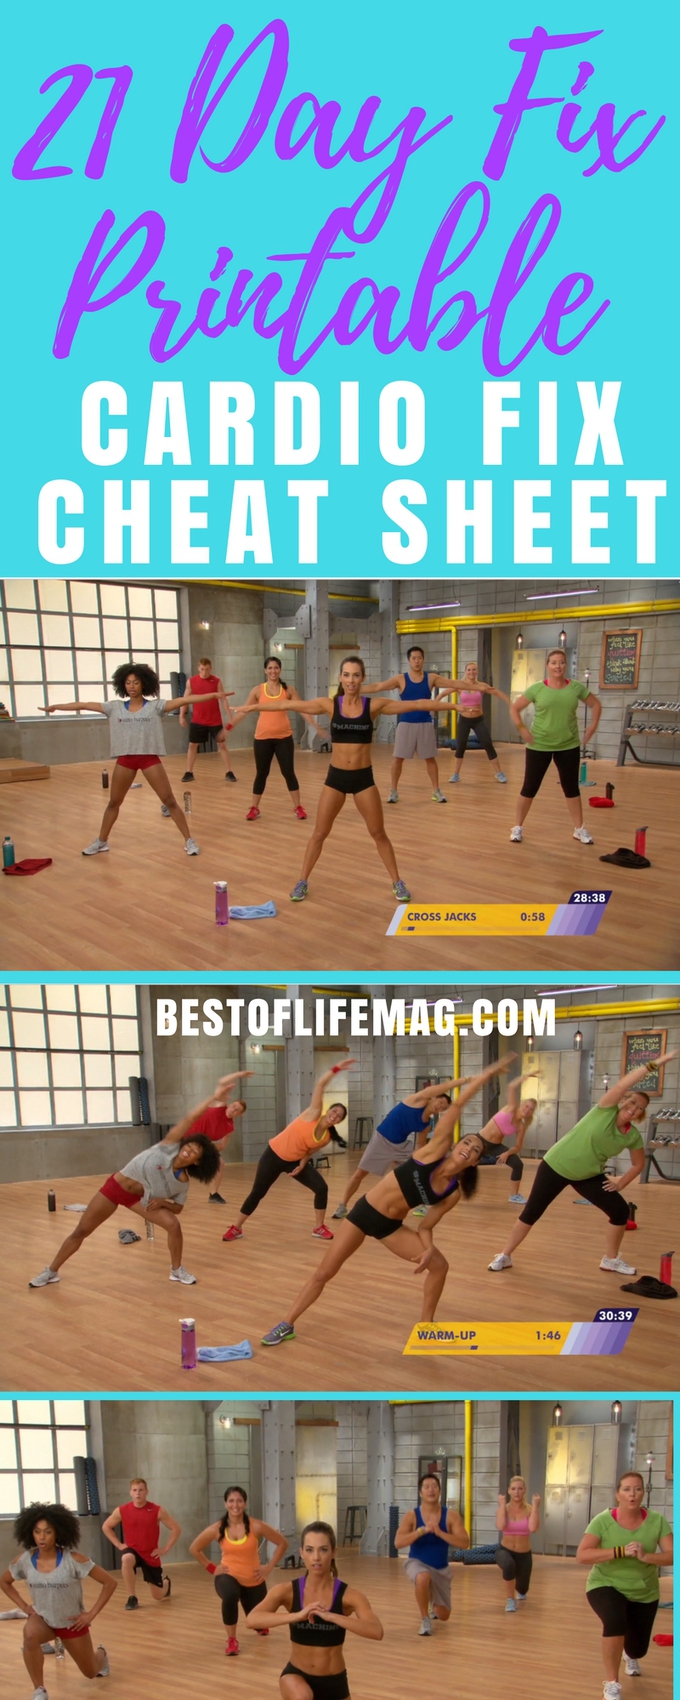 Take your 21 Day Fix workout with you wherever you go with this printable 21 Day Fix Cardio Fix cheat sheet that is complete with workout moves and timing. 21 Day Fix Total Body Cardio Fix | 21 Day Fix Cardio Cheat Sheet | Beachbody Printables | Printable for 21 Day Fix | 21 Day Fix Printable | Weight Loss Tips | Beachbody Tips | Tips for Losing Weight #21dayfix #printable 